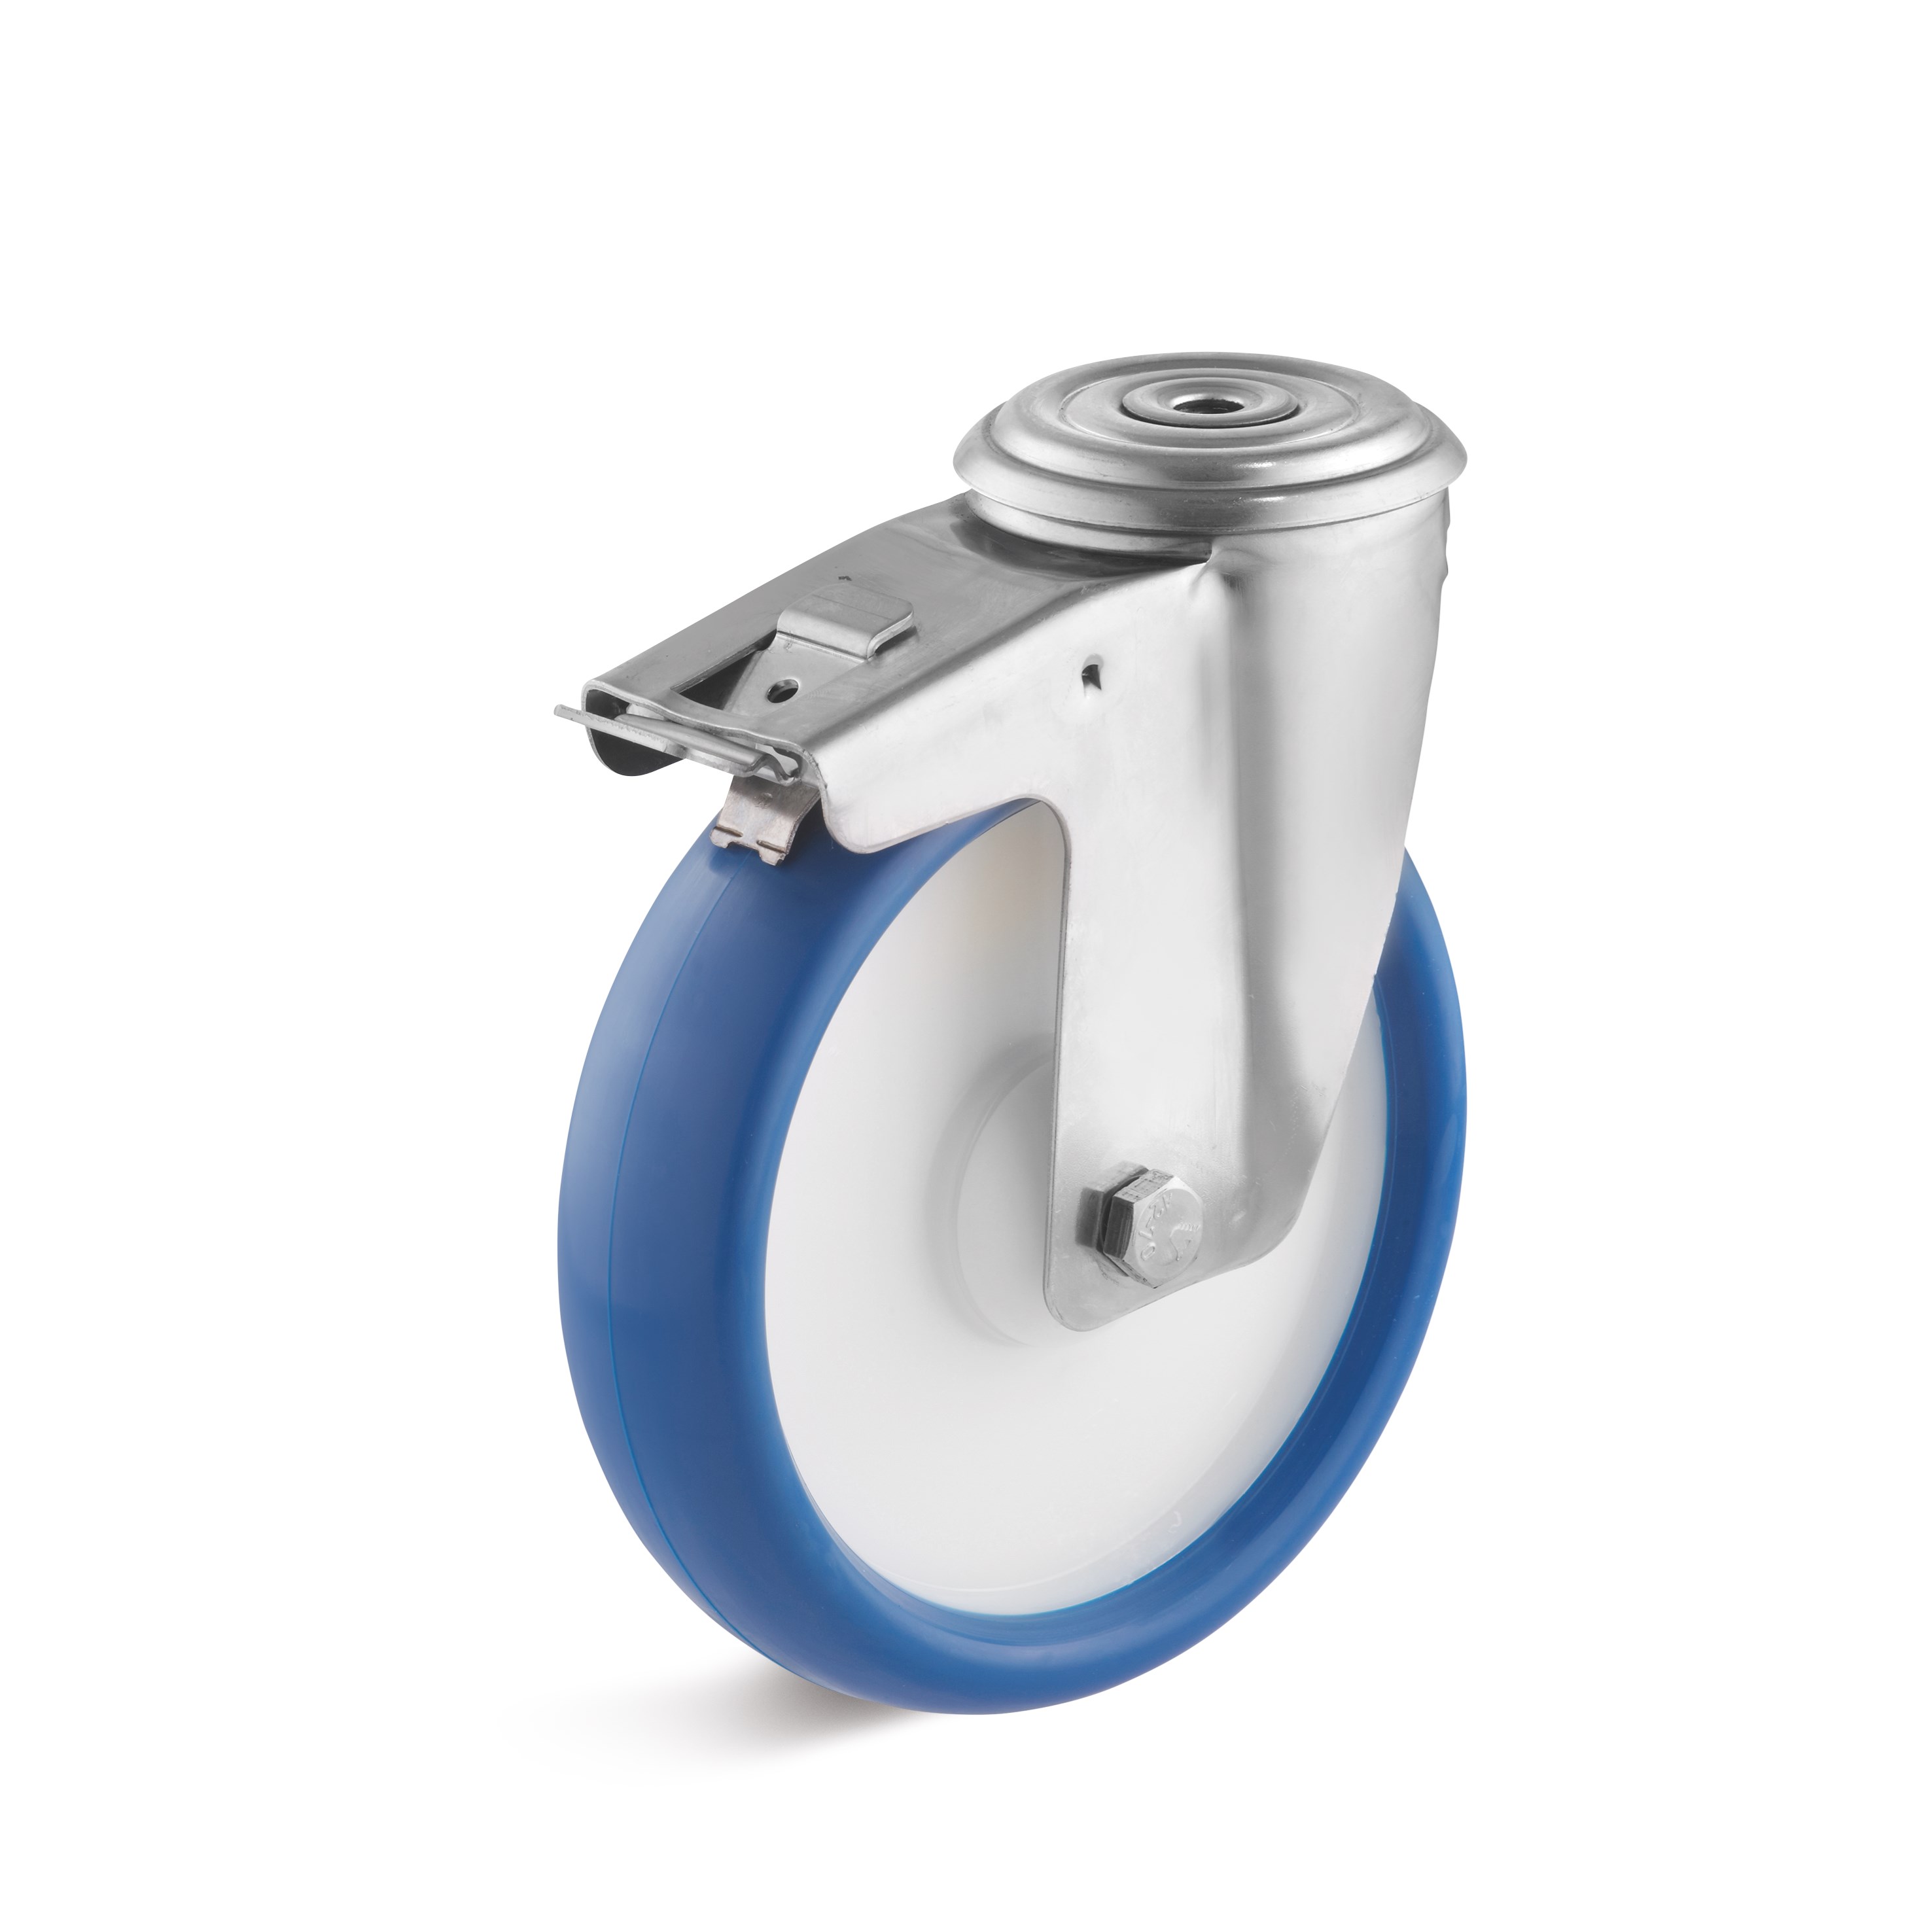 Stainless steel swivel castor with back hole attachment and double stop, polyurethane wheel L-IV-PUBK-160-K-1-DSN